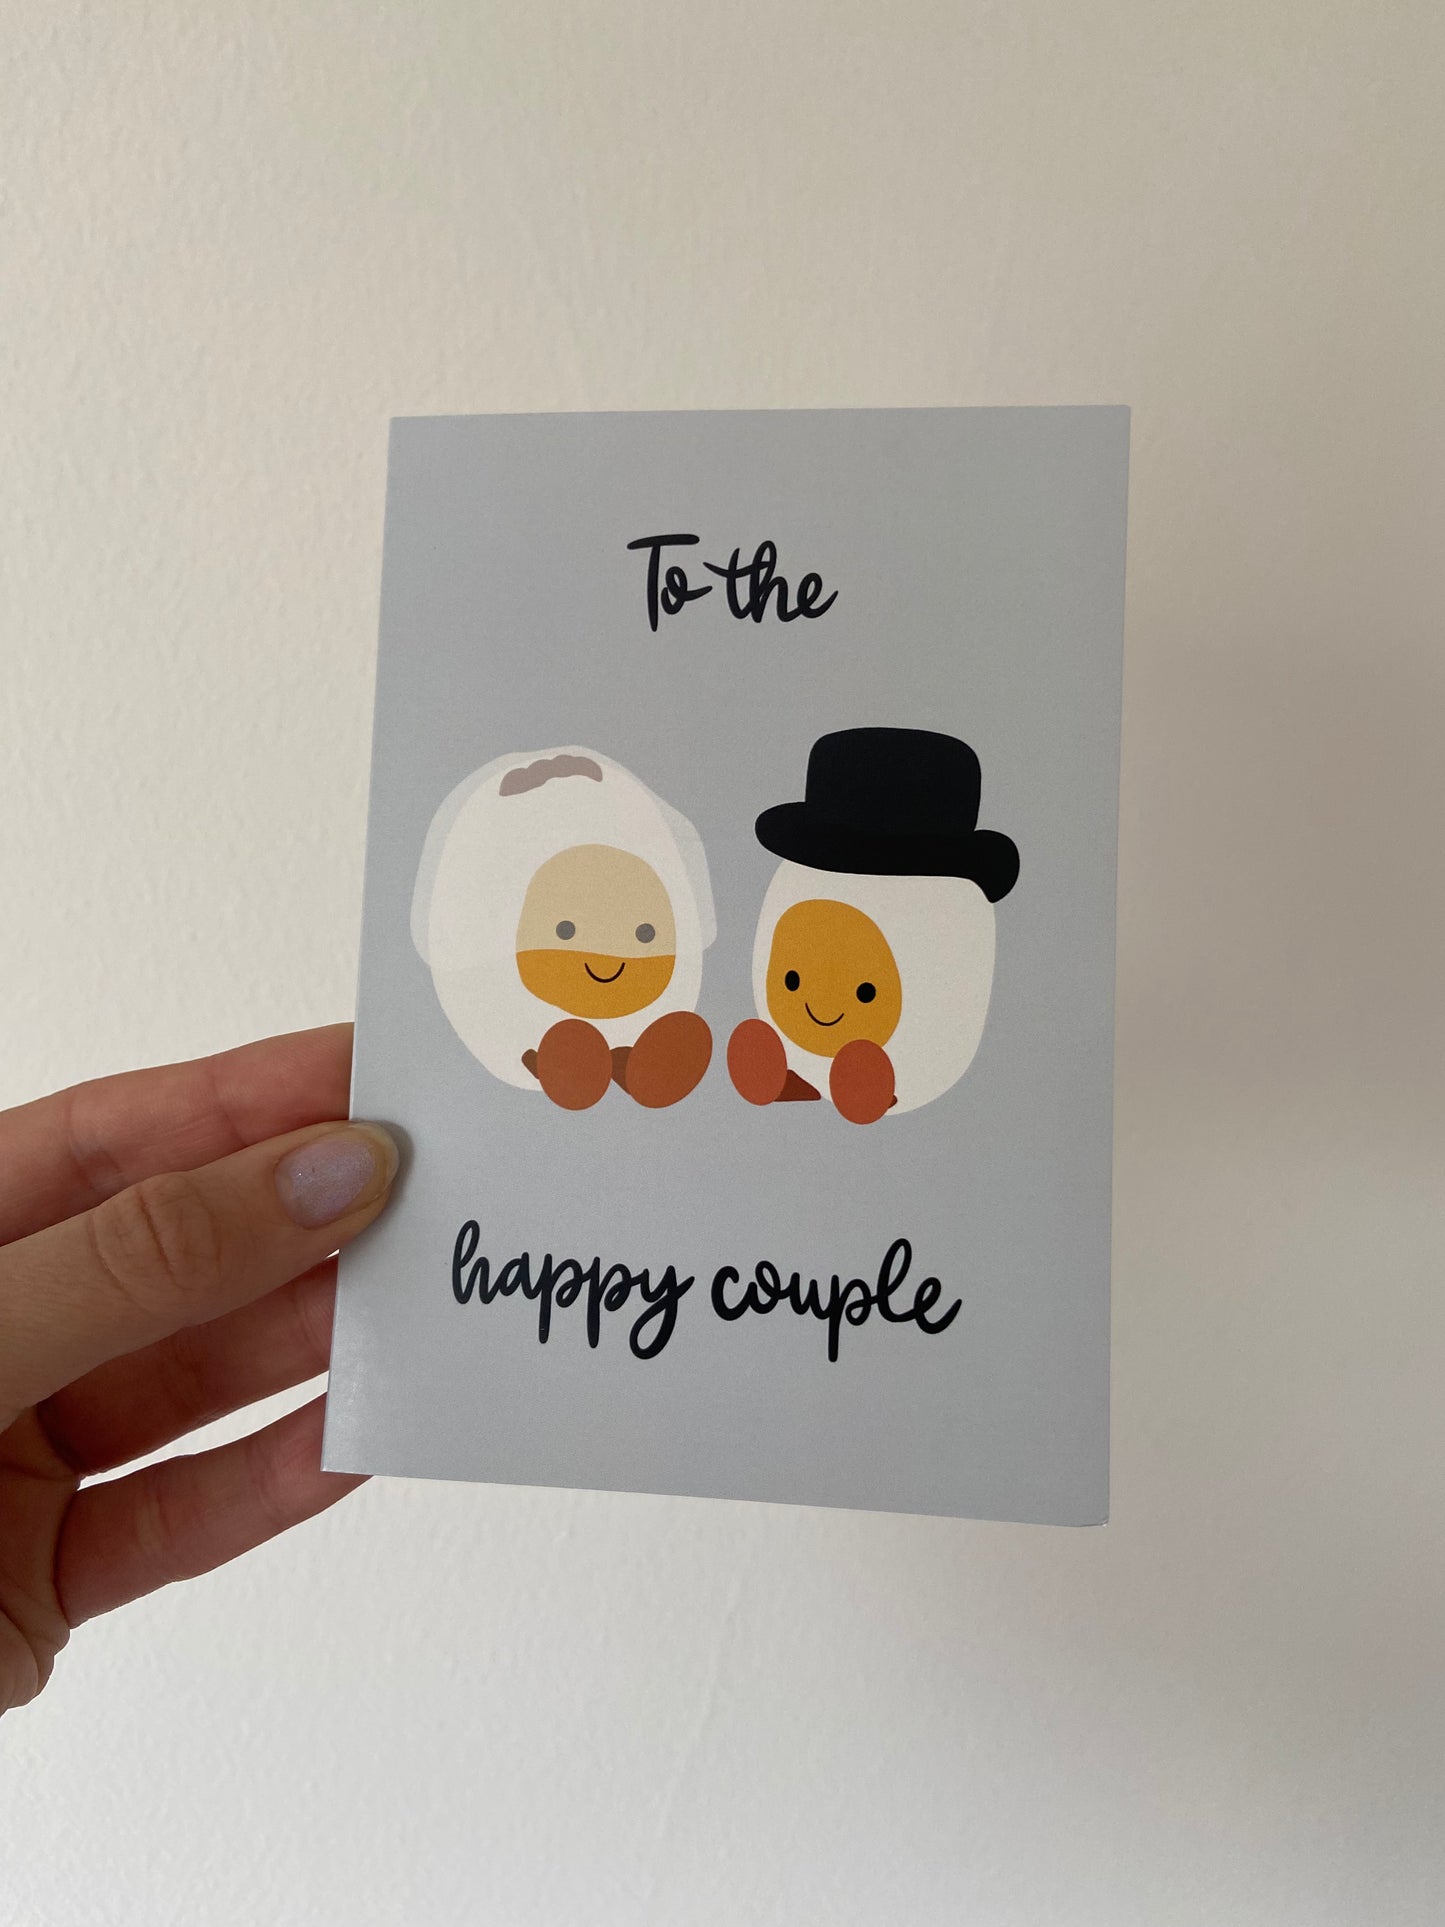 To the happy couple card. A6.